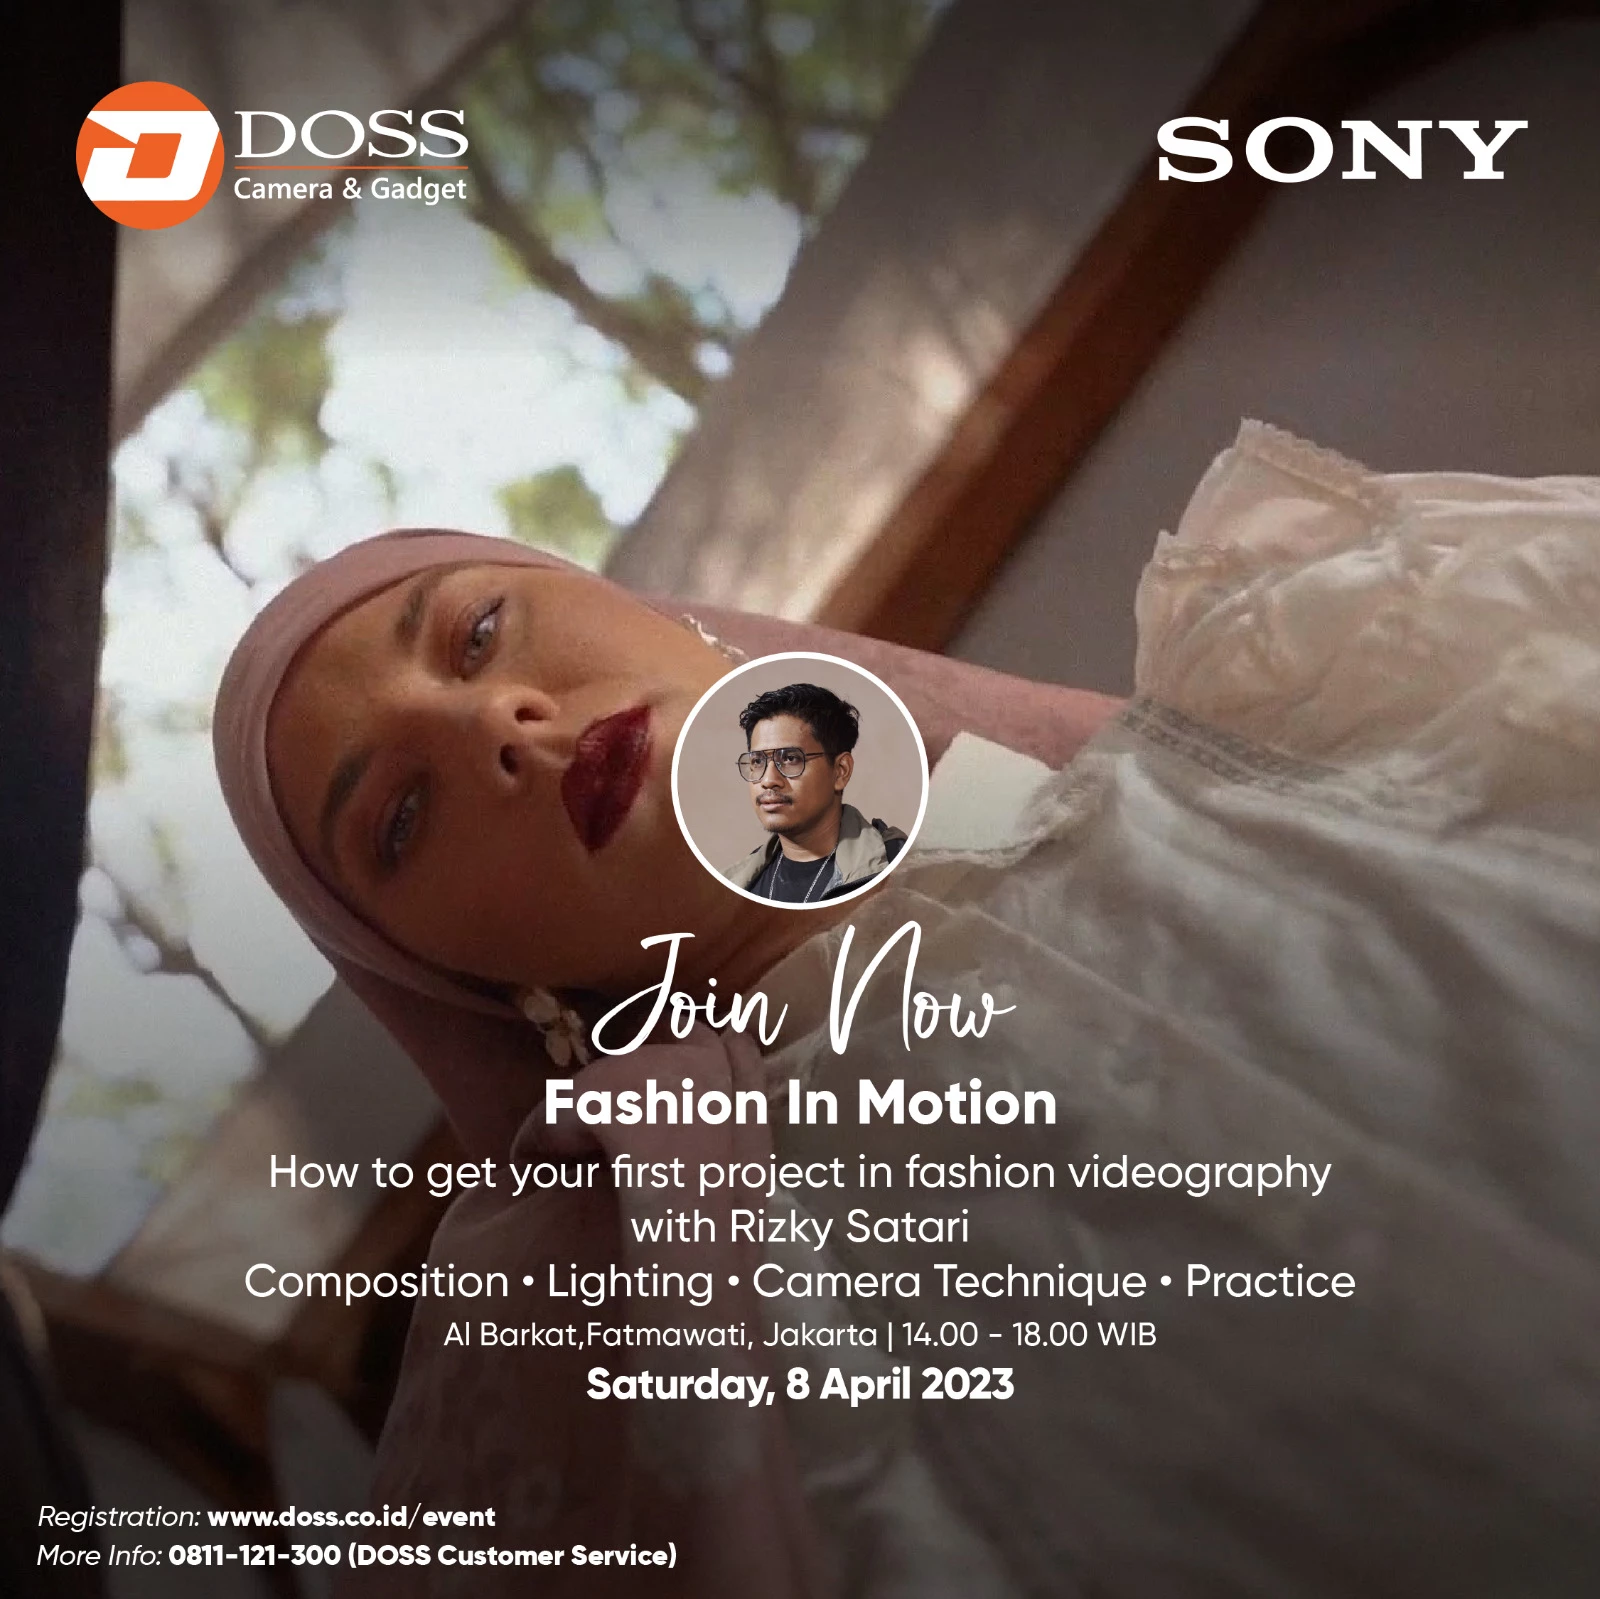 How To Get Your First Projection in Fashion Videography with Rizky Satari